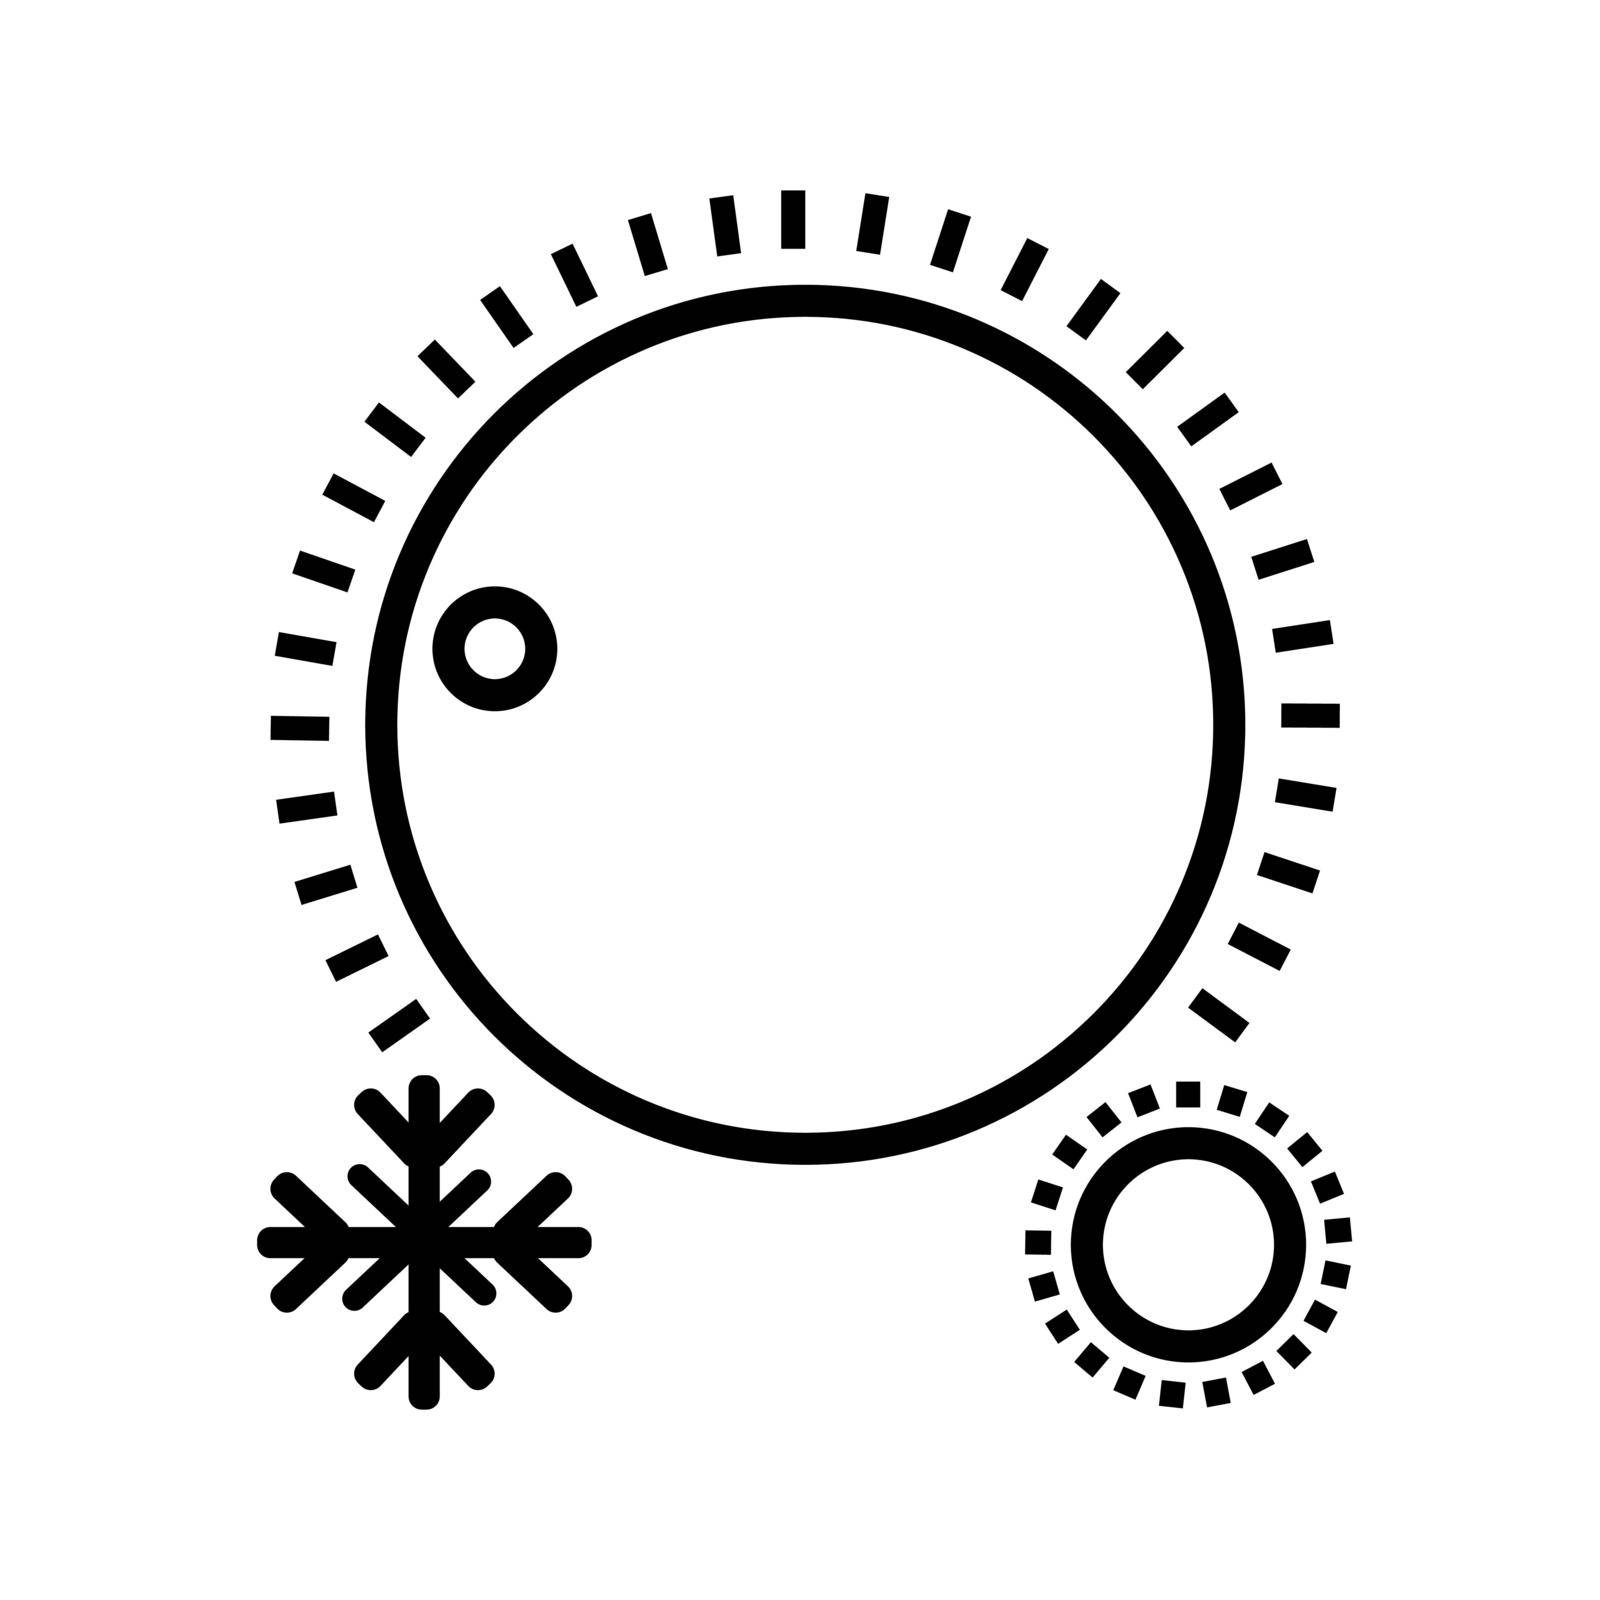 Temperature control equipment. Abstract vector icon on the white, Illustration isolated for graphic and web design. Simple flat symbol.